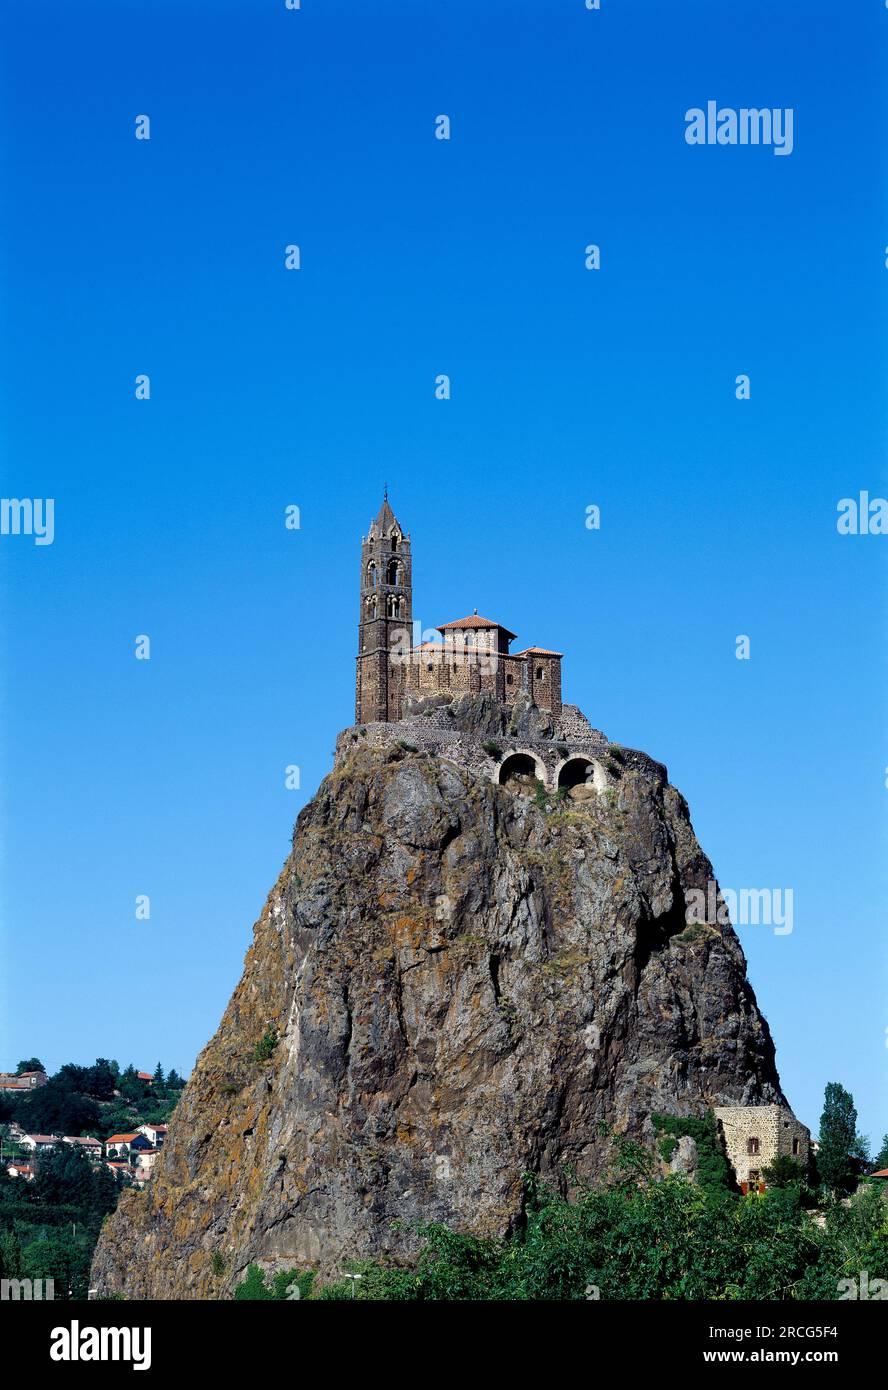 Church on hill, Le Puy, Auvergne, France Stock Photo